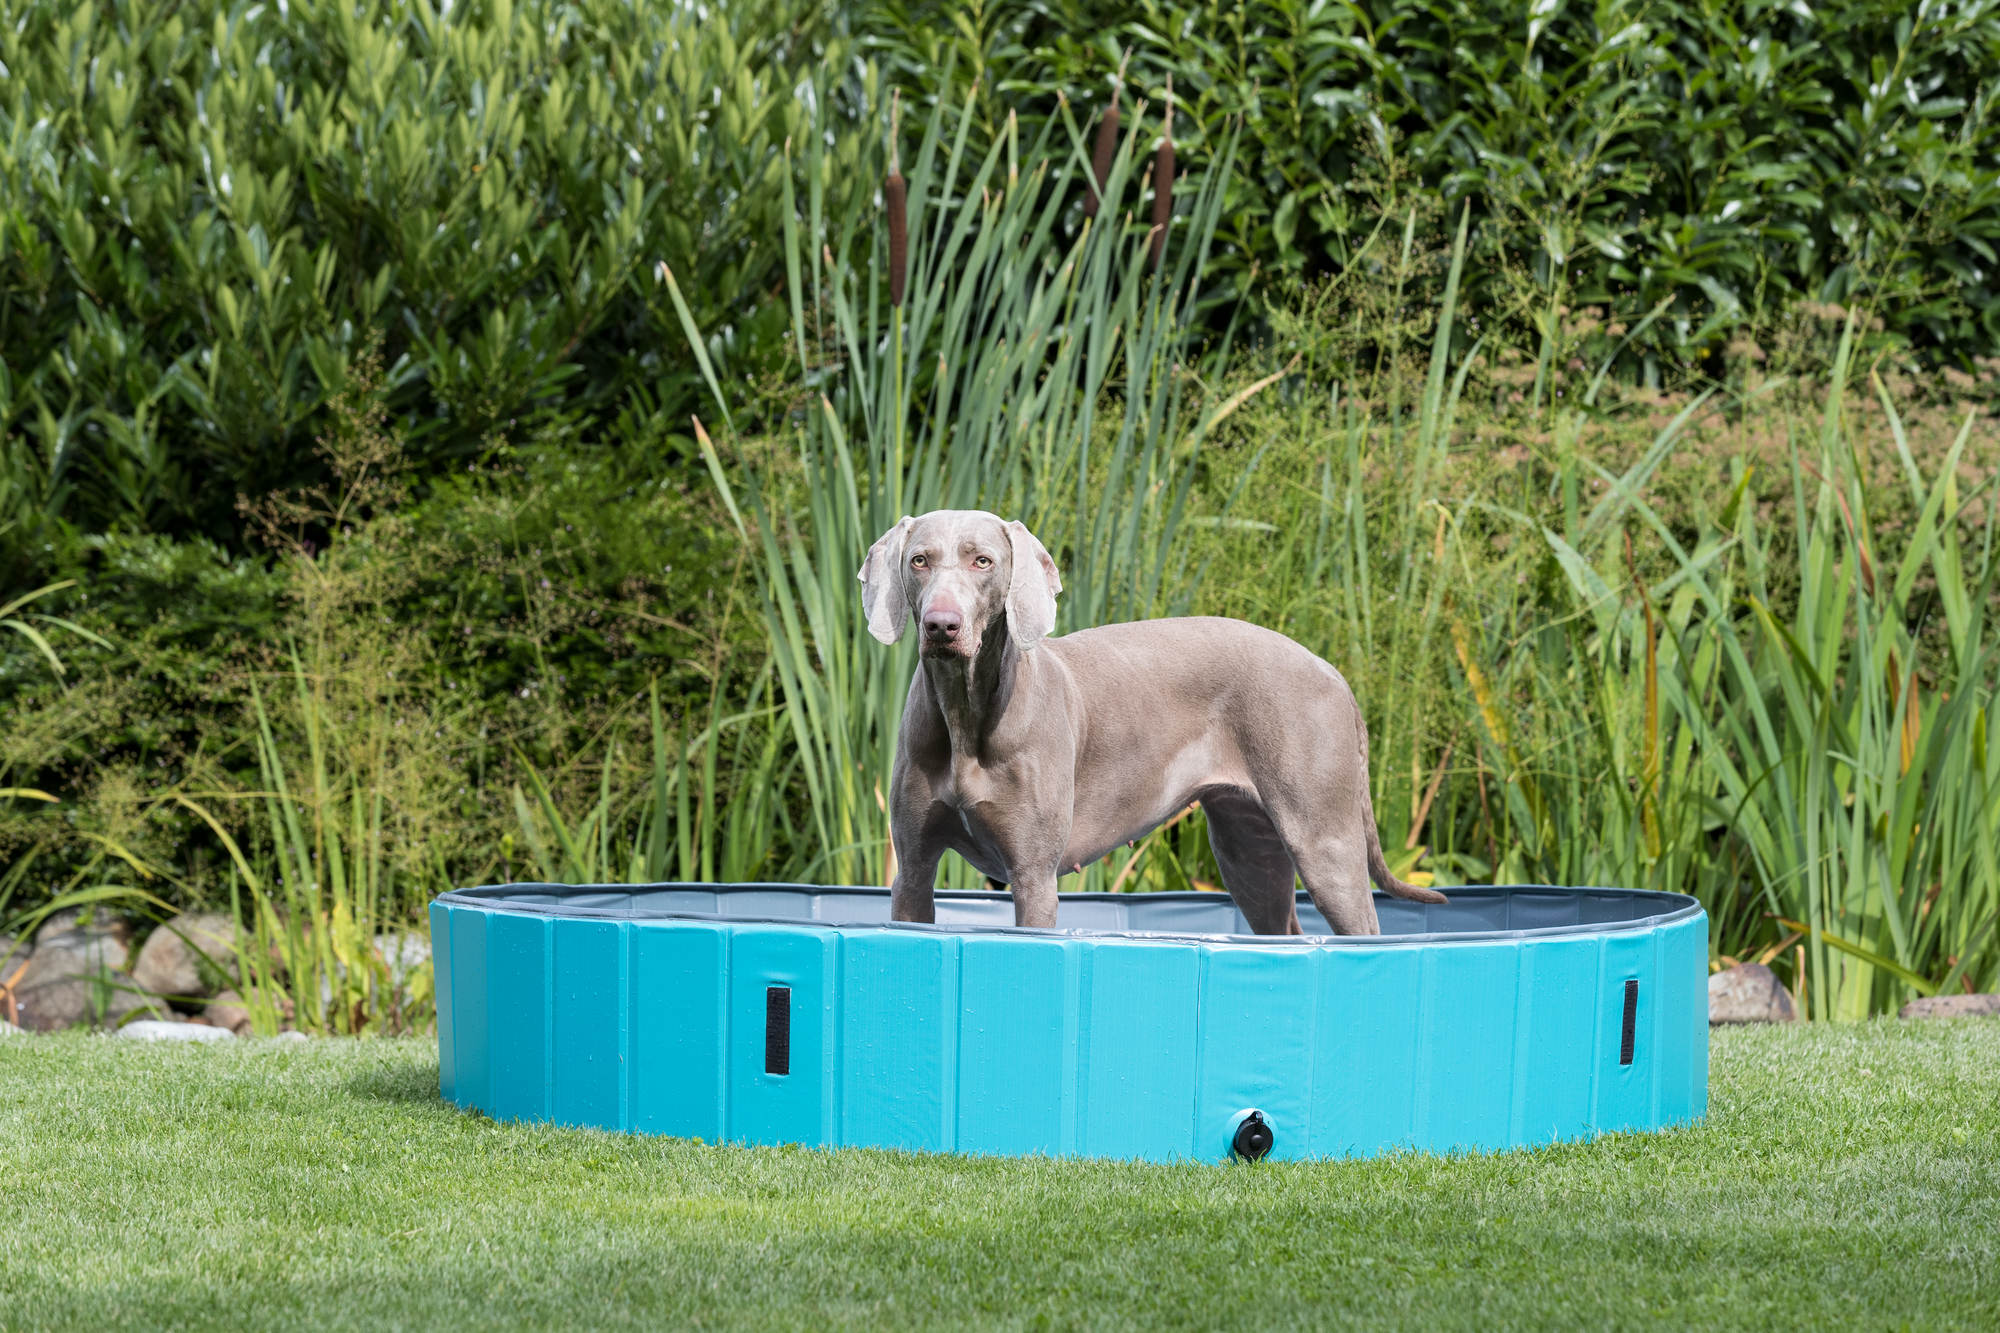 TRIXIE 63" Outdoor Splash Pool for Dogs, Foldable Playpen, Bathtub, Blue, XX-Large - image 2 of 8